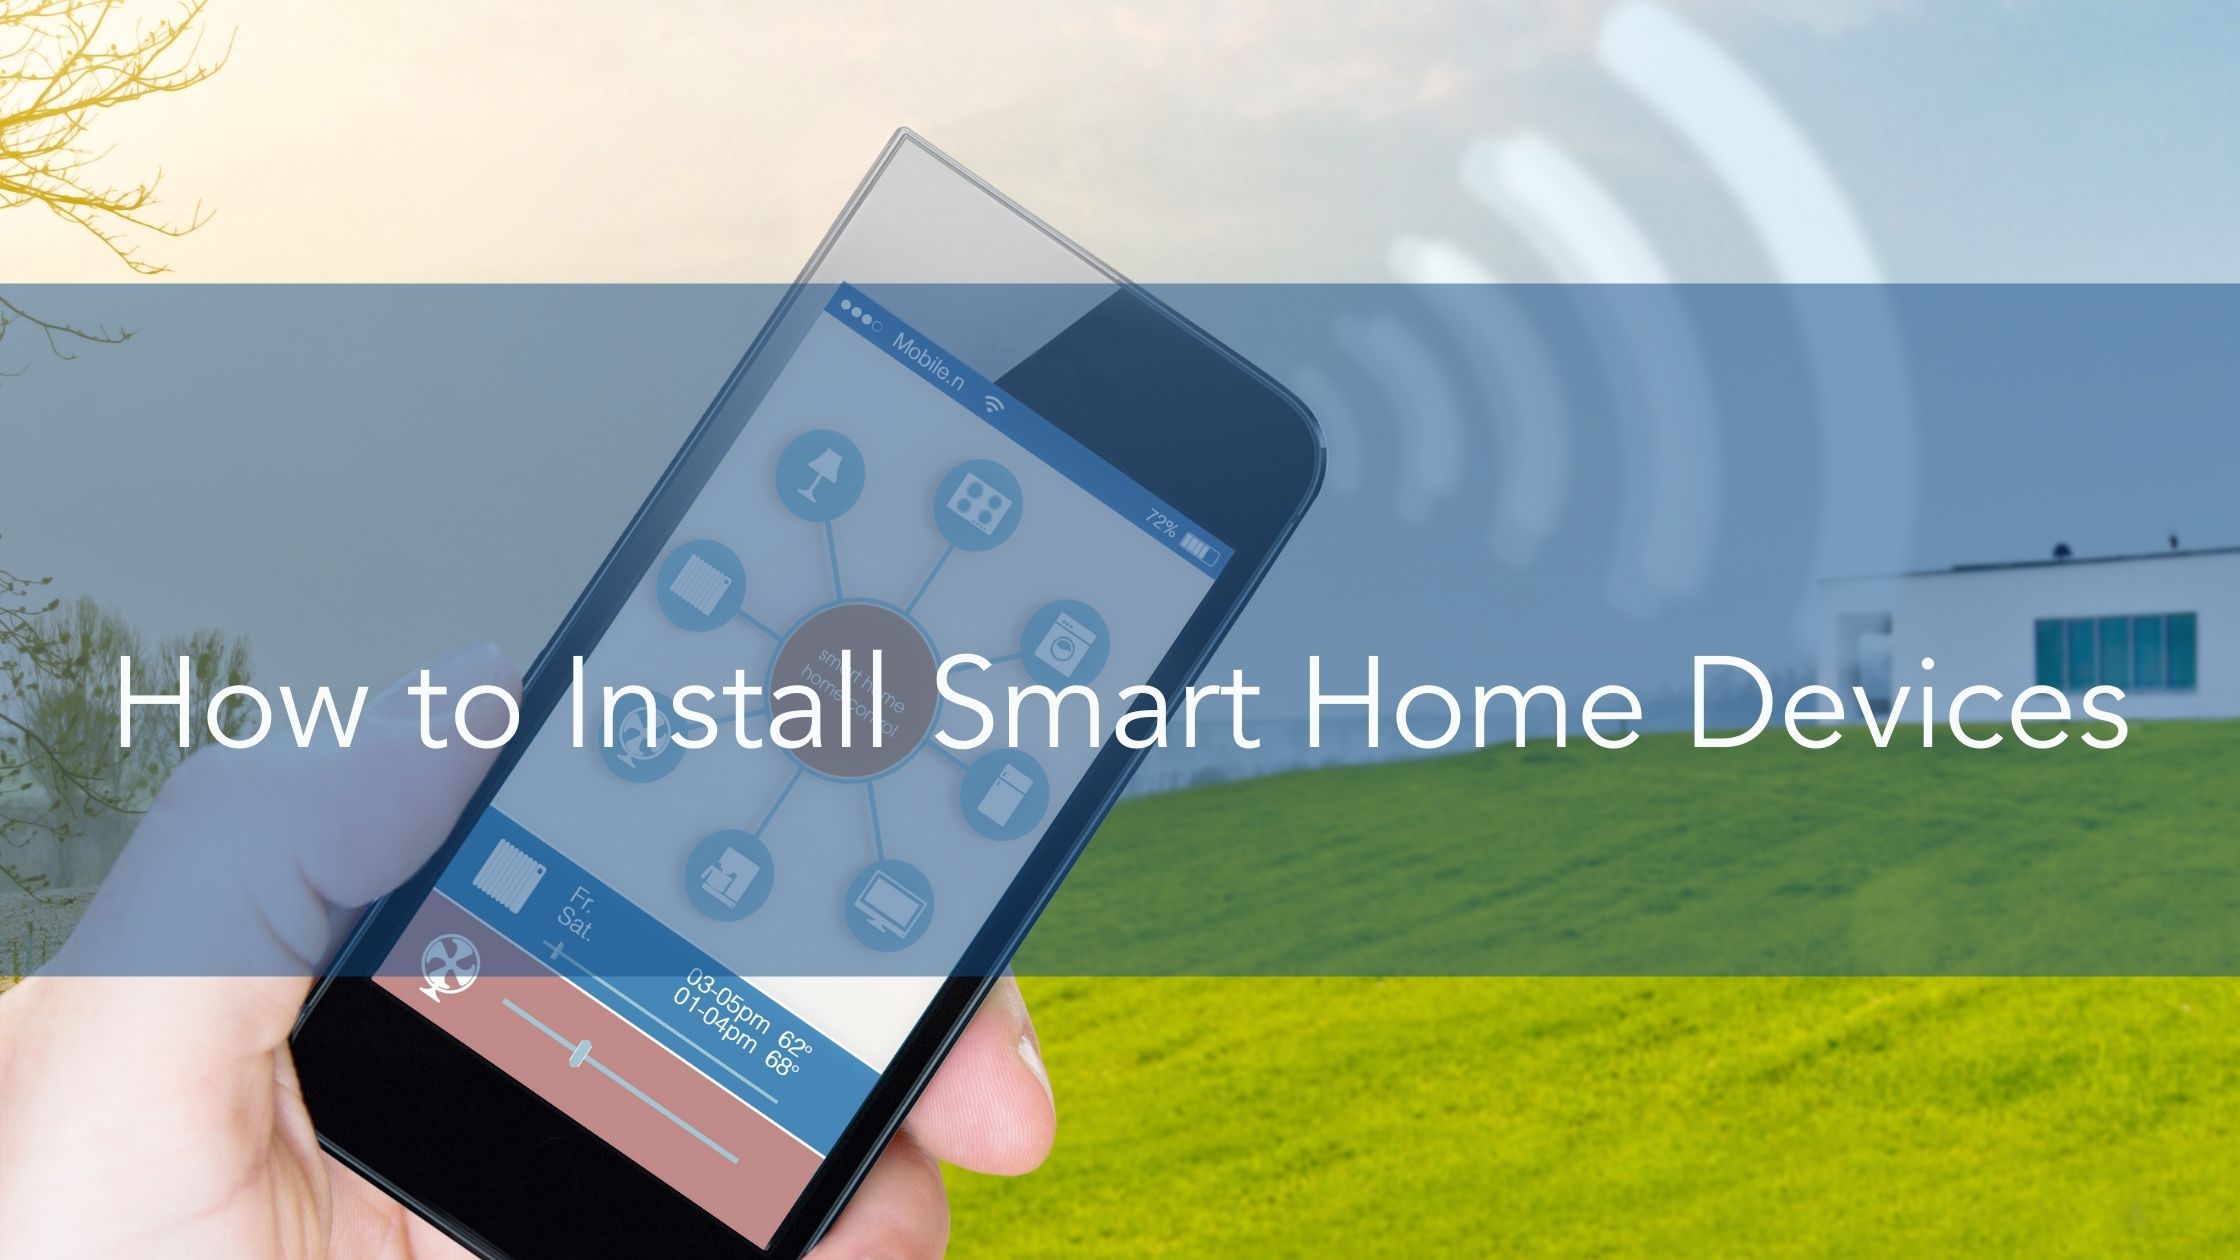 https://handymanconnection.com/wp-content/uploads/2021/11/How-to-Install-Smart-Home-Devices.jpg